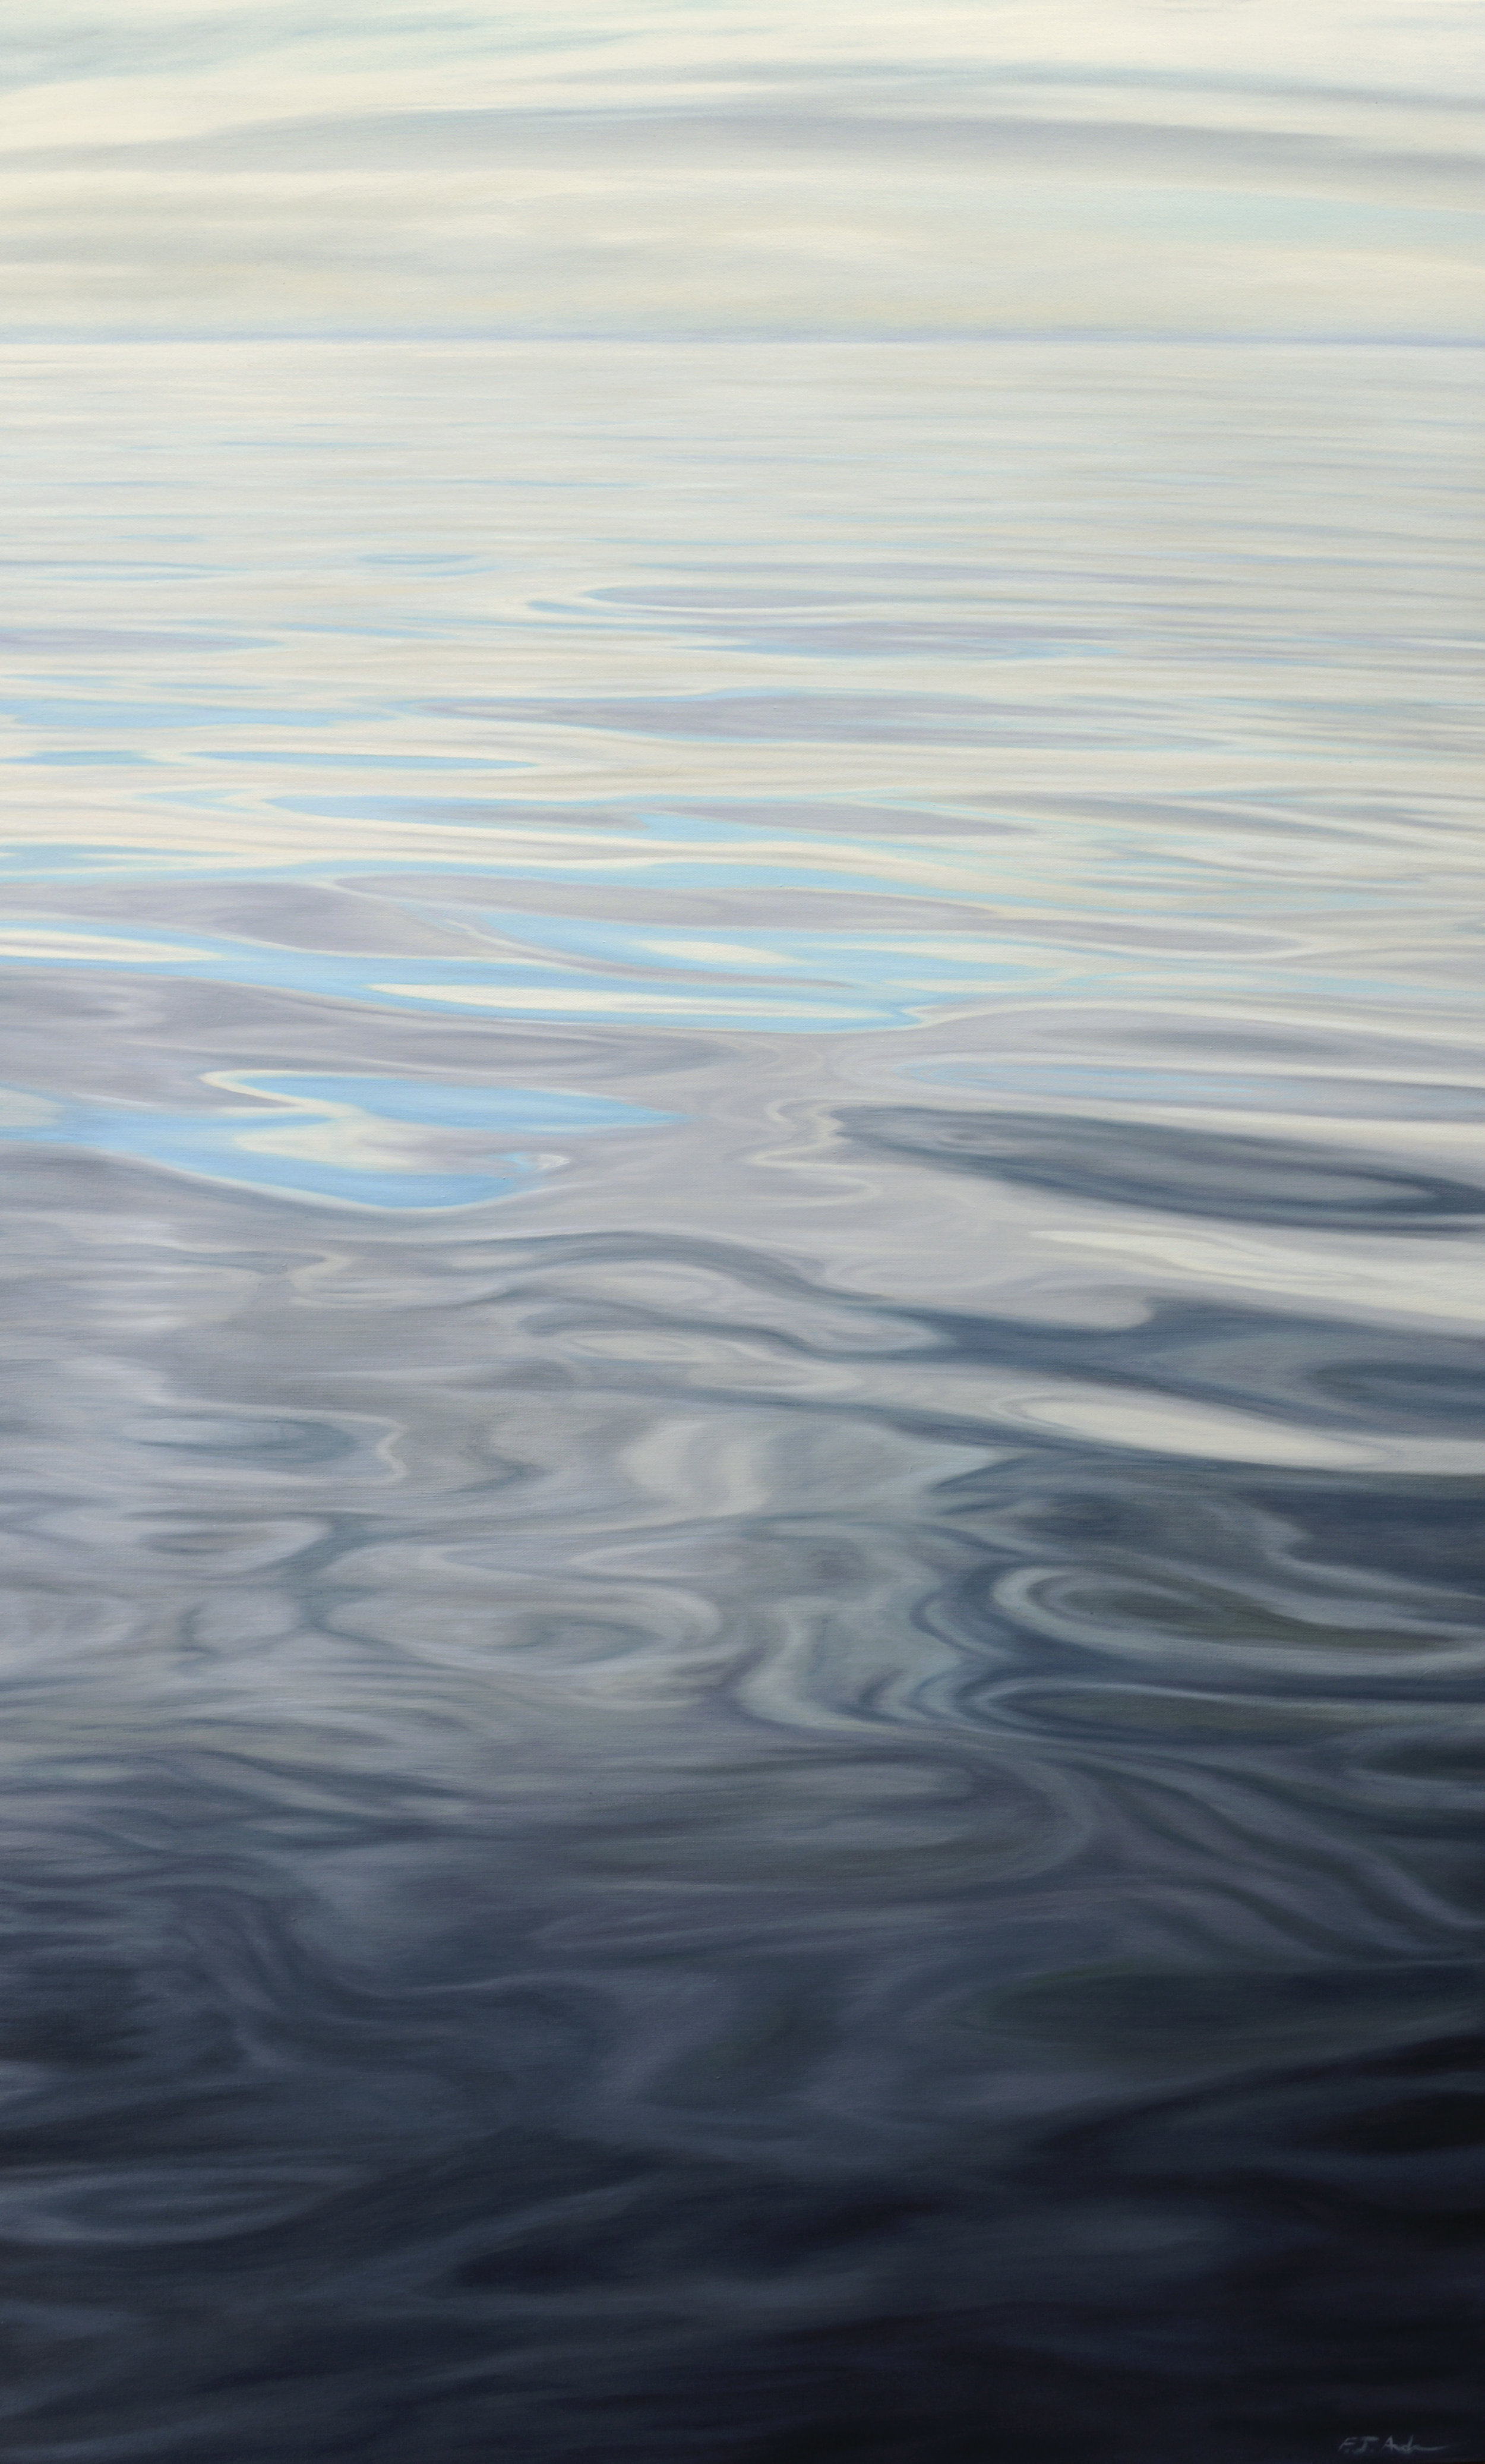  “Relax”   Oil on Canvas    48"x26"    Original-Sold    Prints Available    